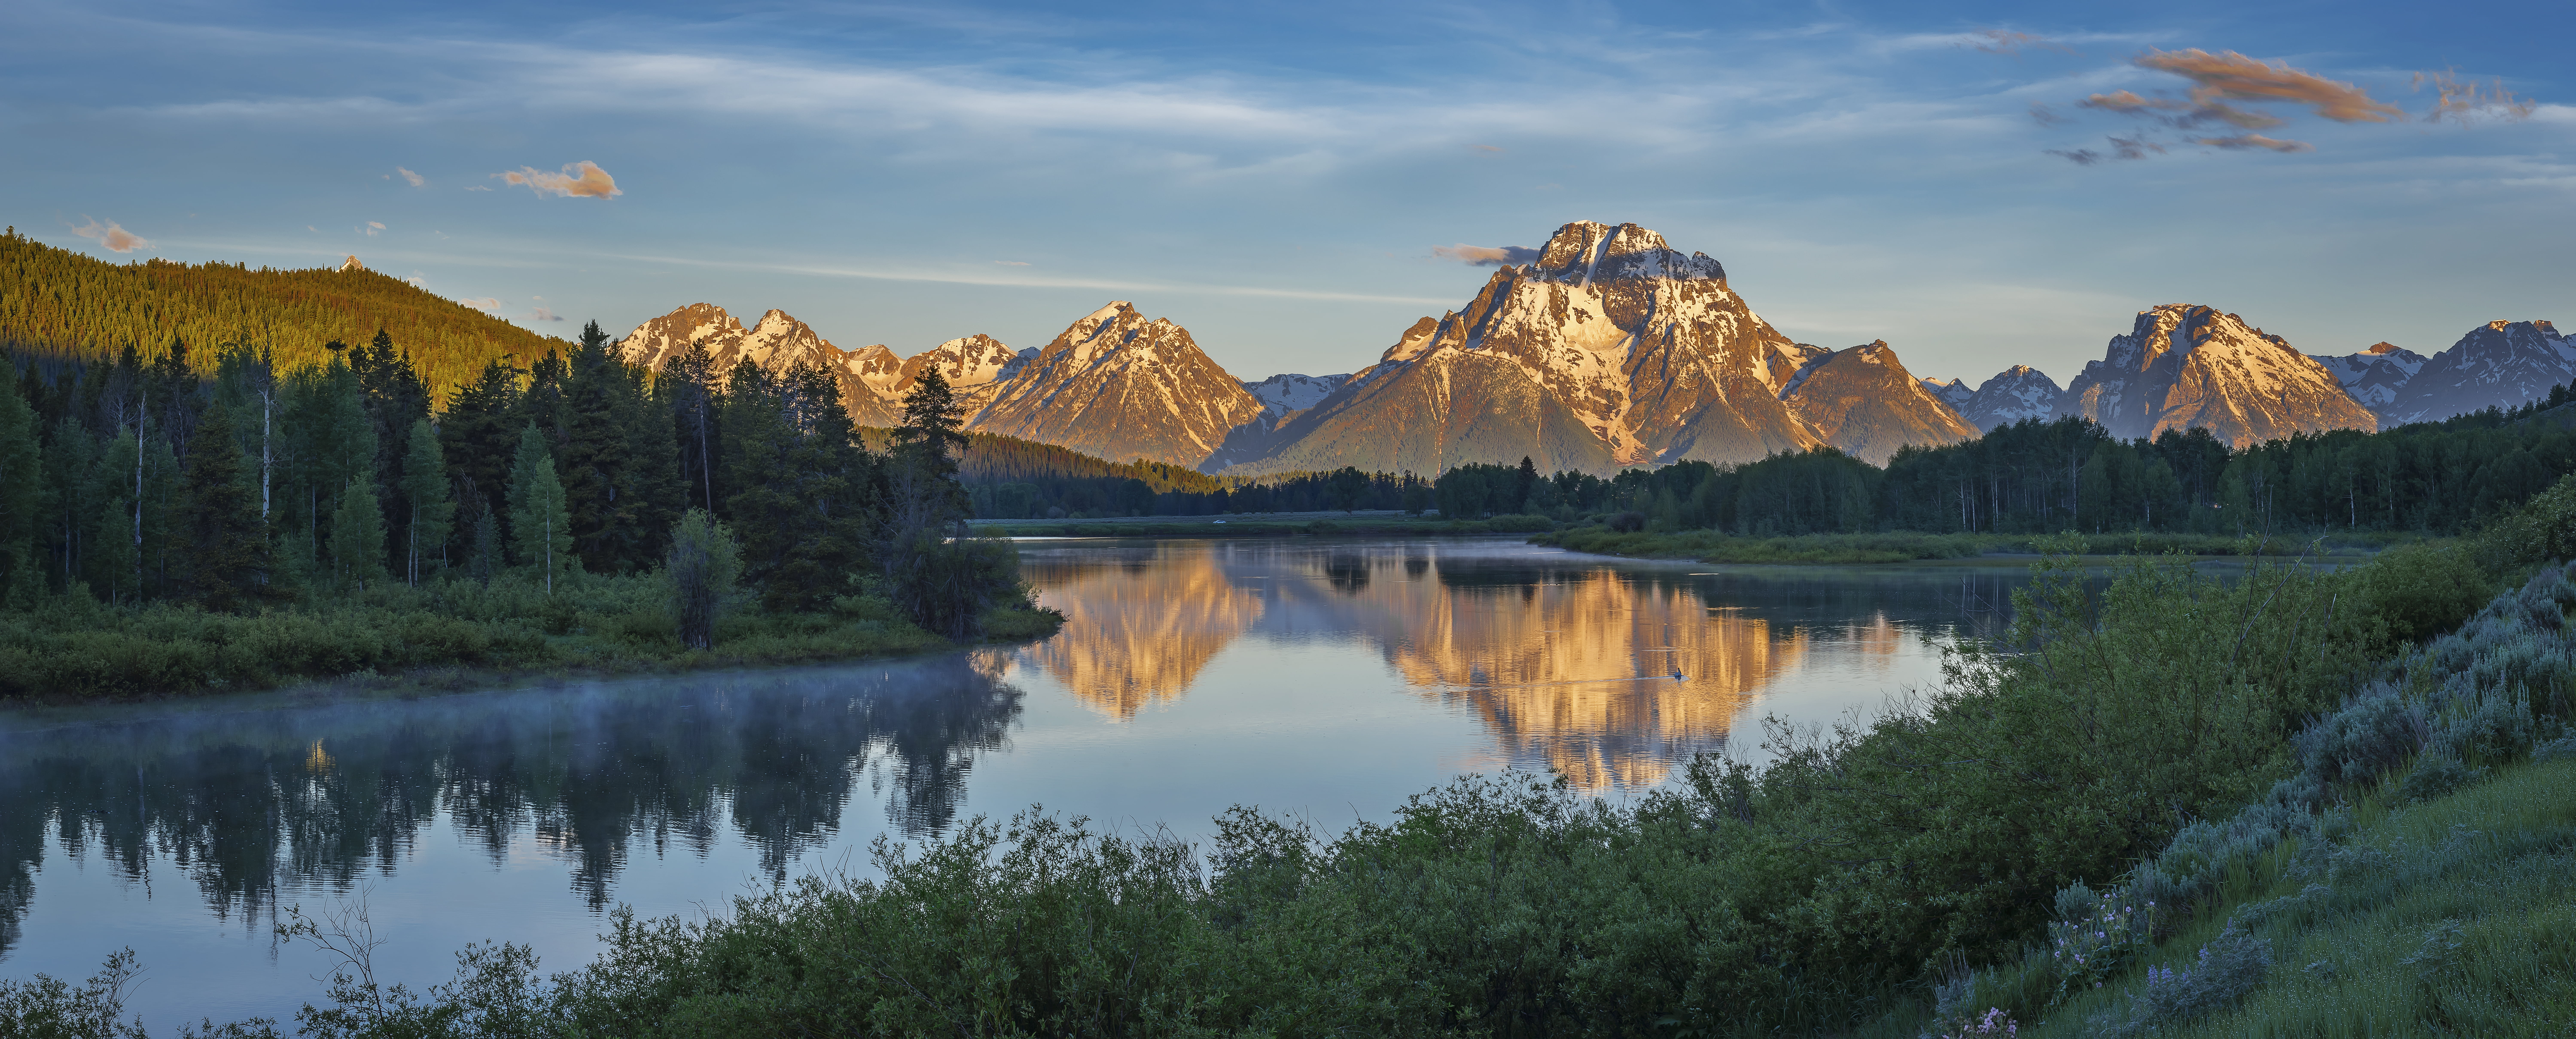 body of water and gray mountain during day time, grand teton national park